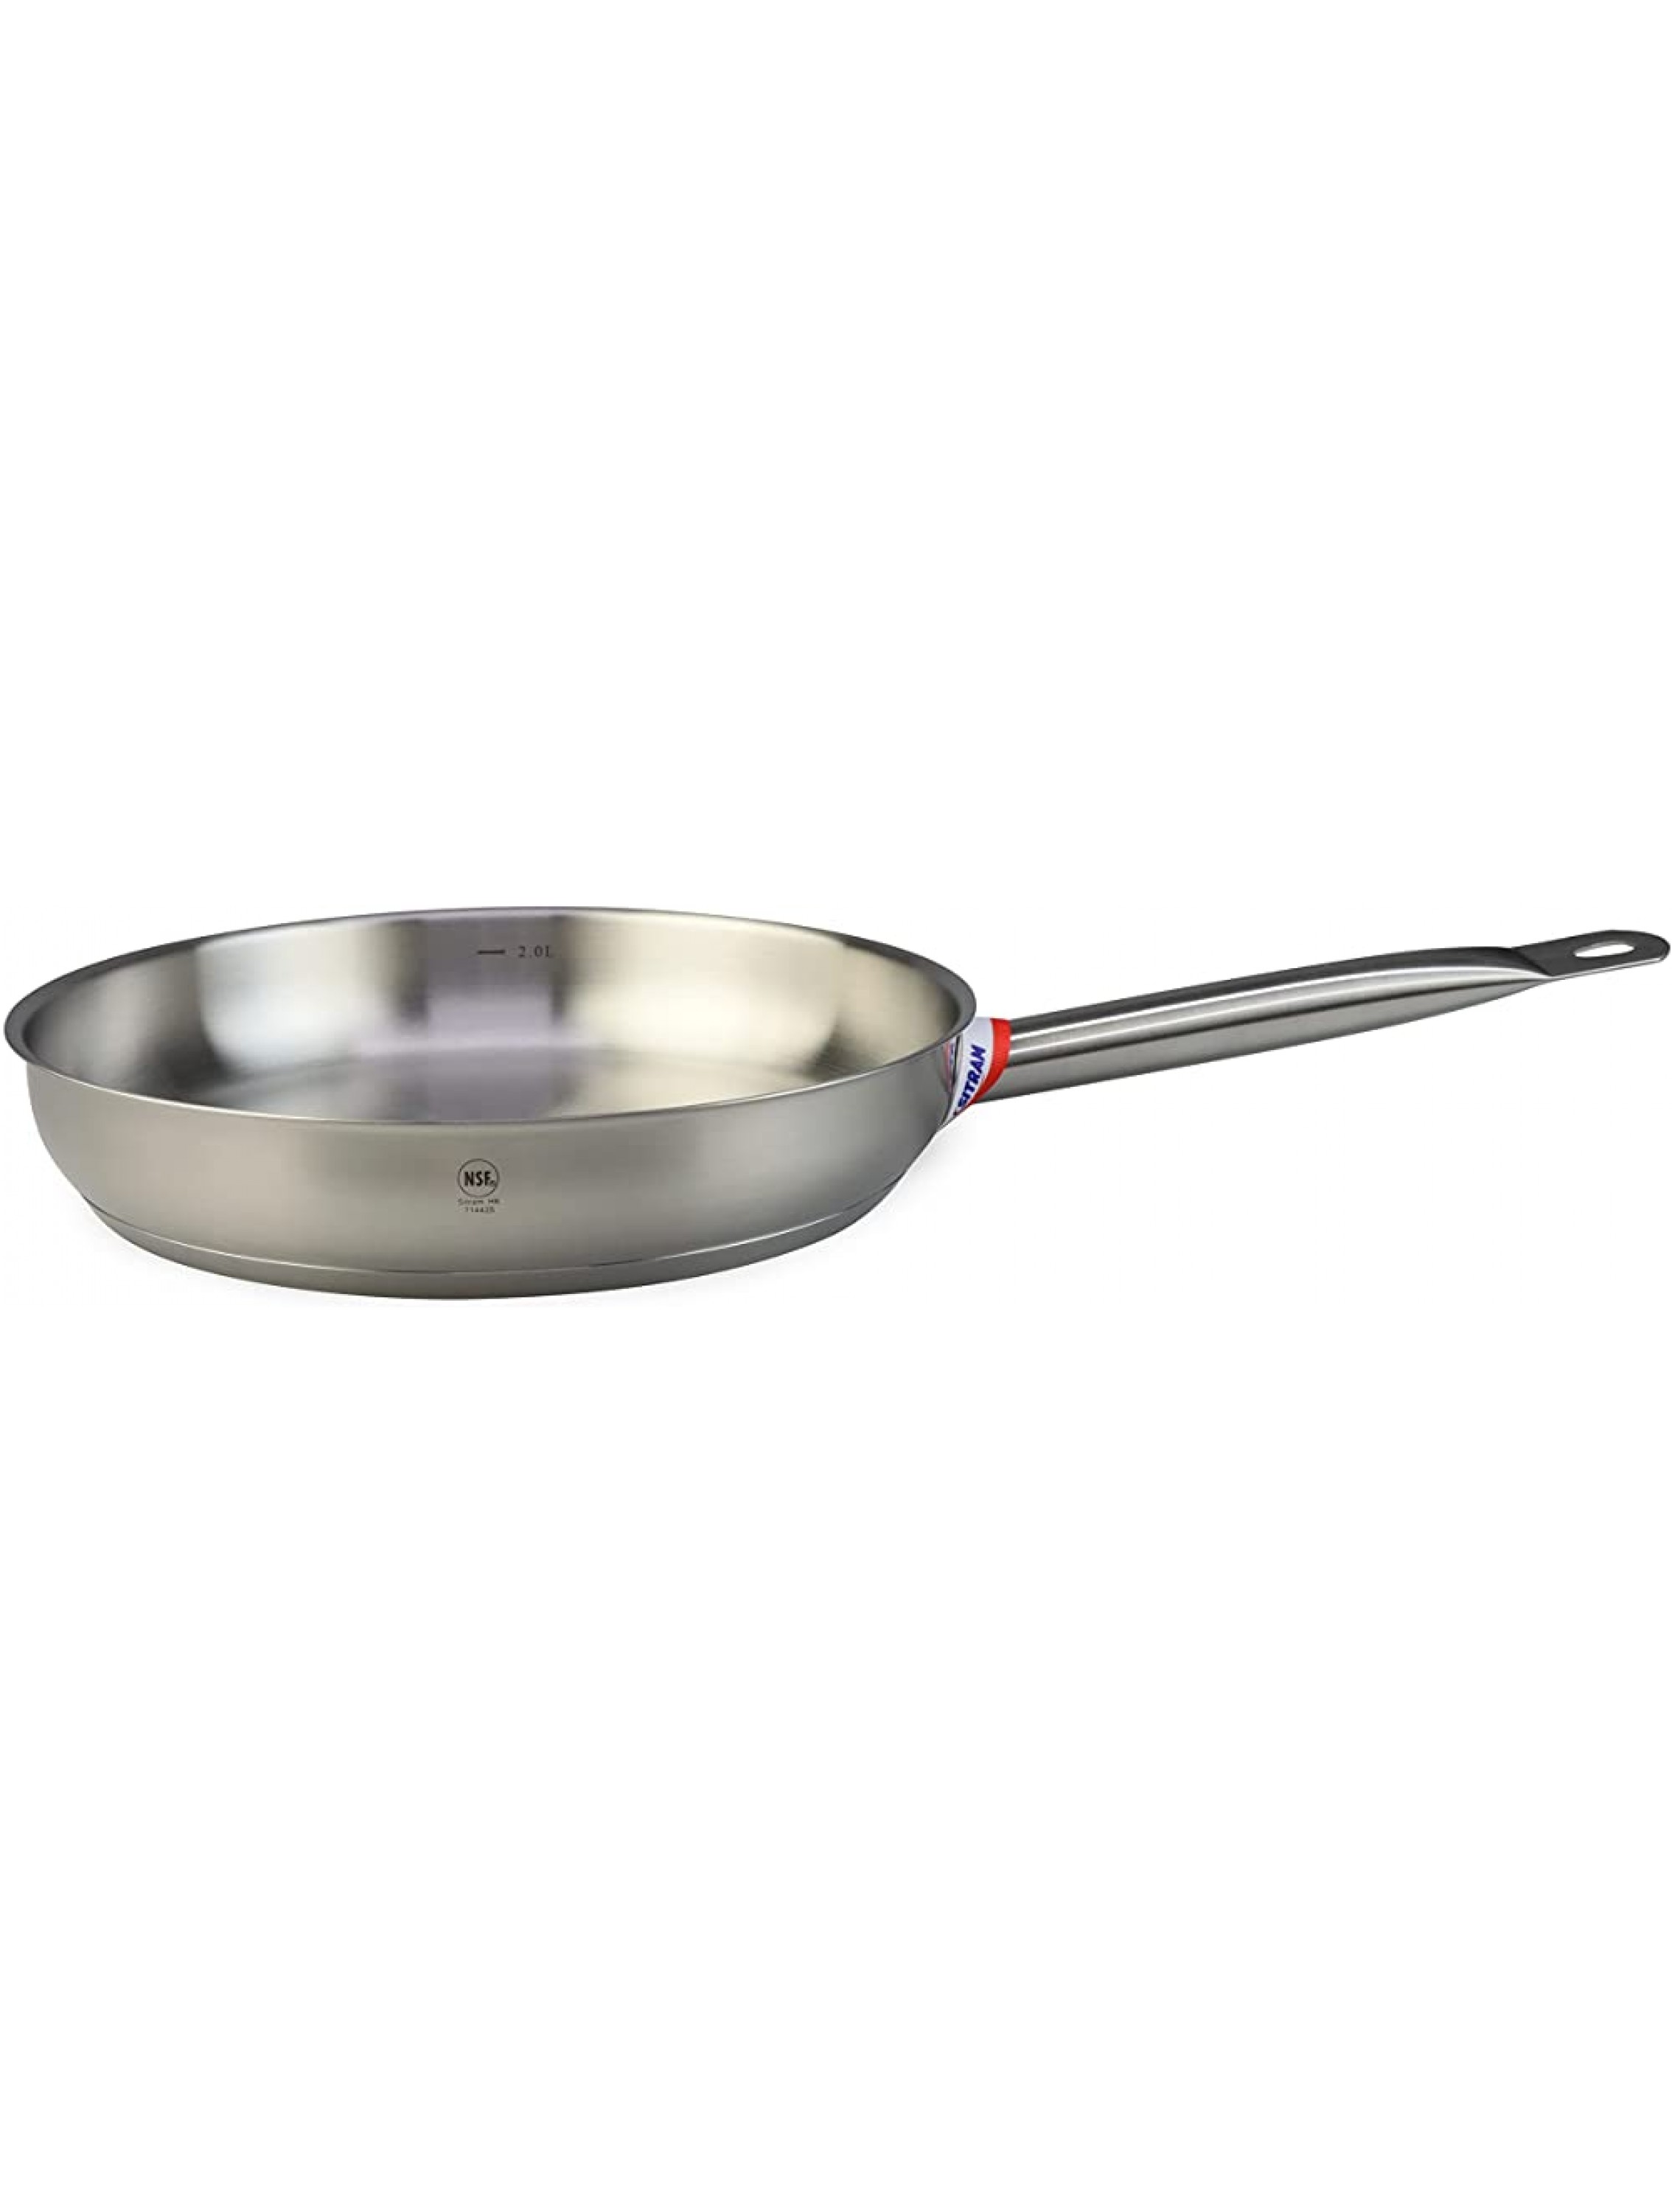 Sitram 28 cm 11.02 in Open Fry Pan suitable for all stove tops including induction Stainless Steel 11 Inch 714425 - BULZCBPWV